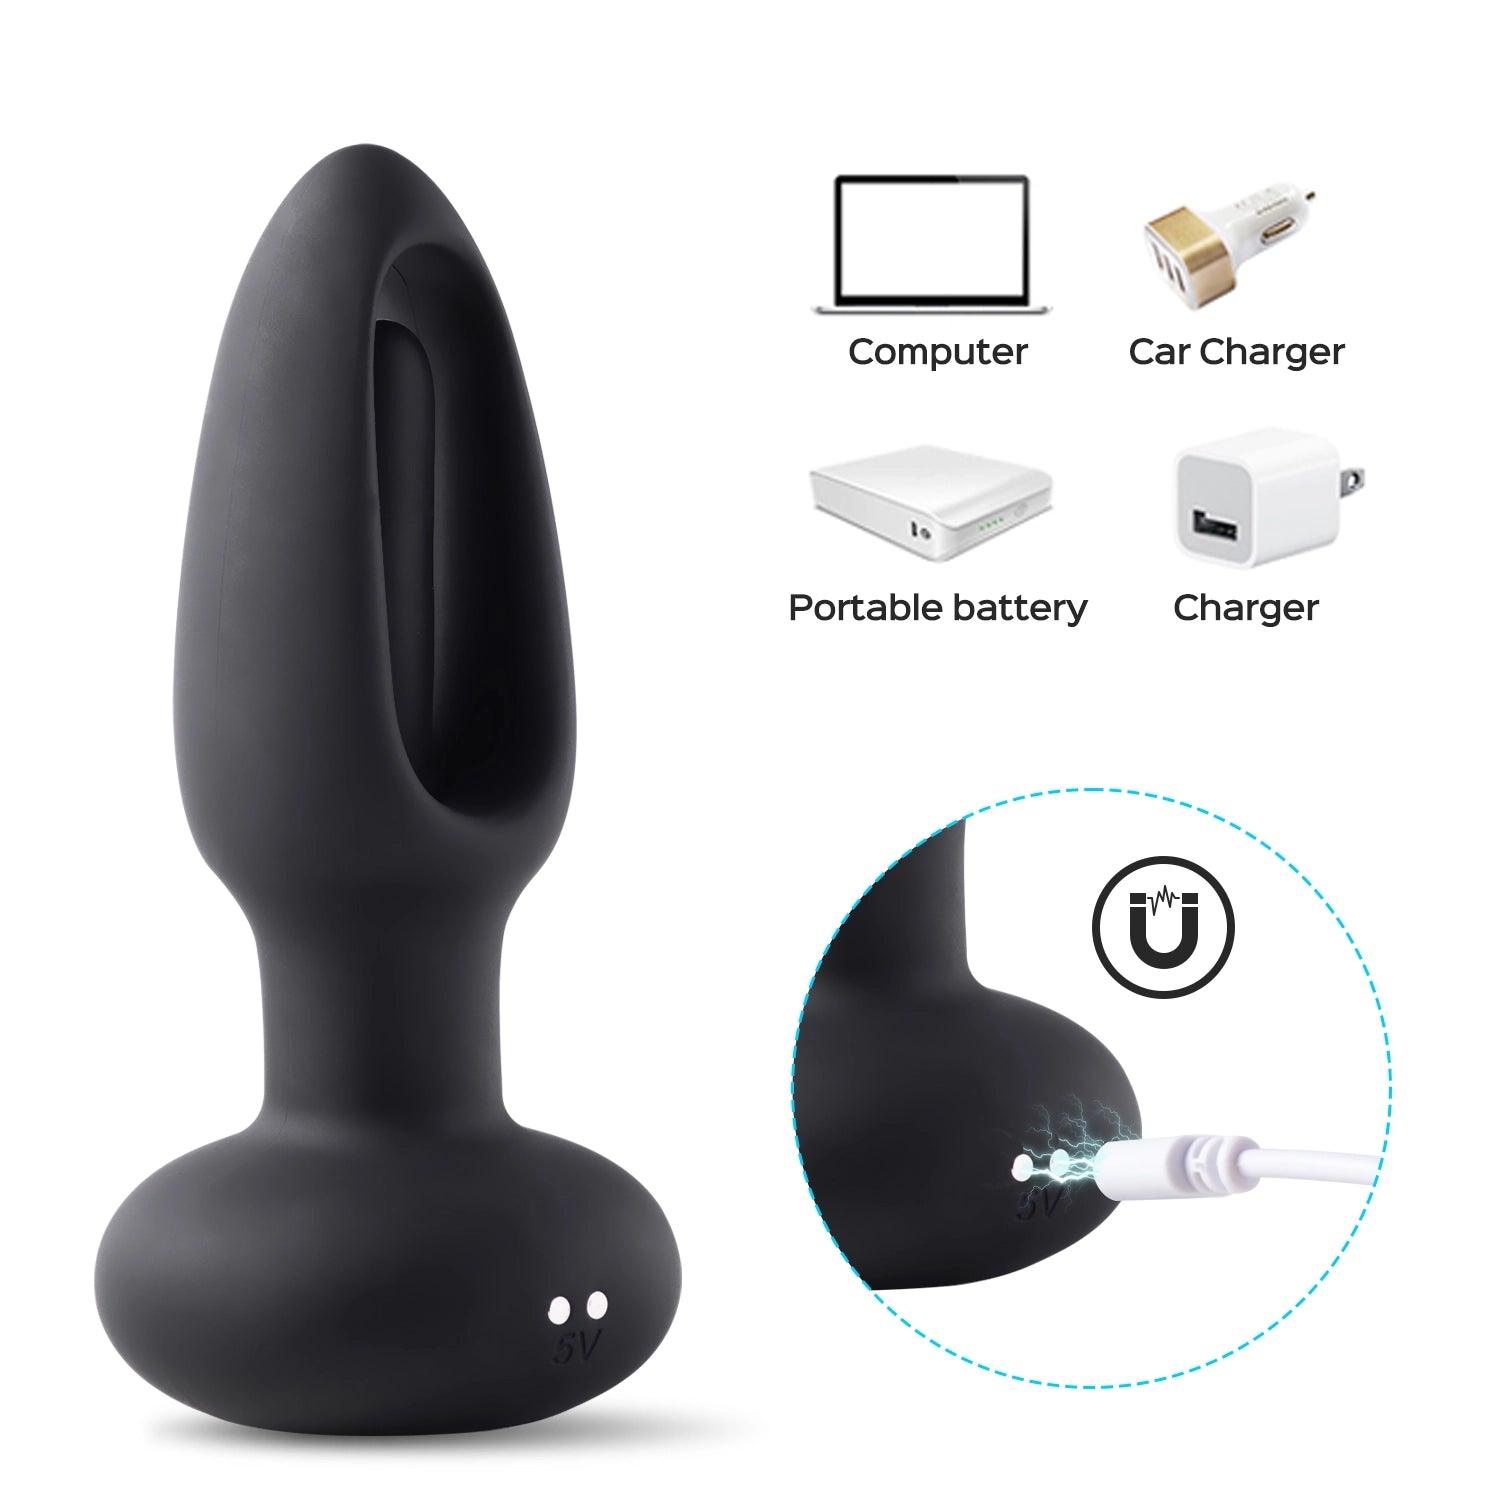 SNUGGY Flapping Butt Sex Toy Vibrating Anal Plug - Honey Play Box Official